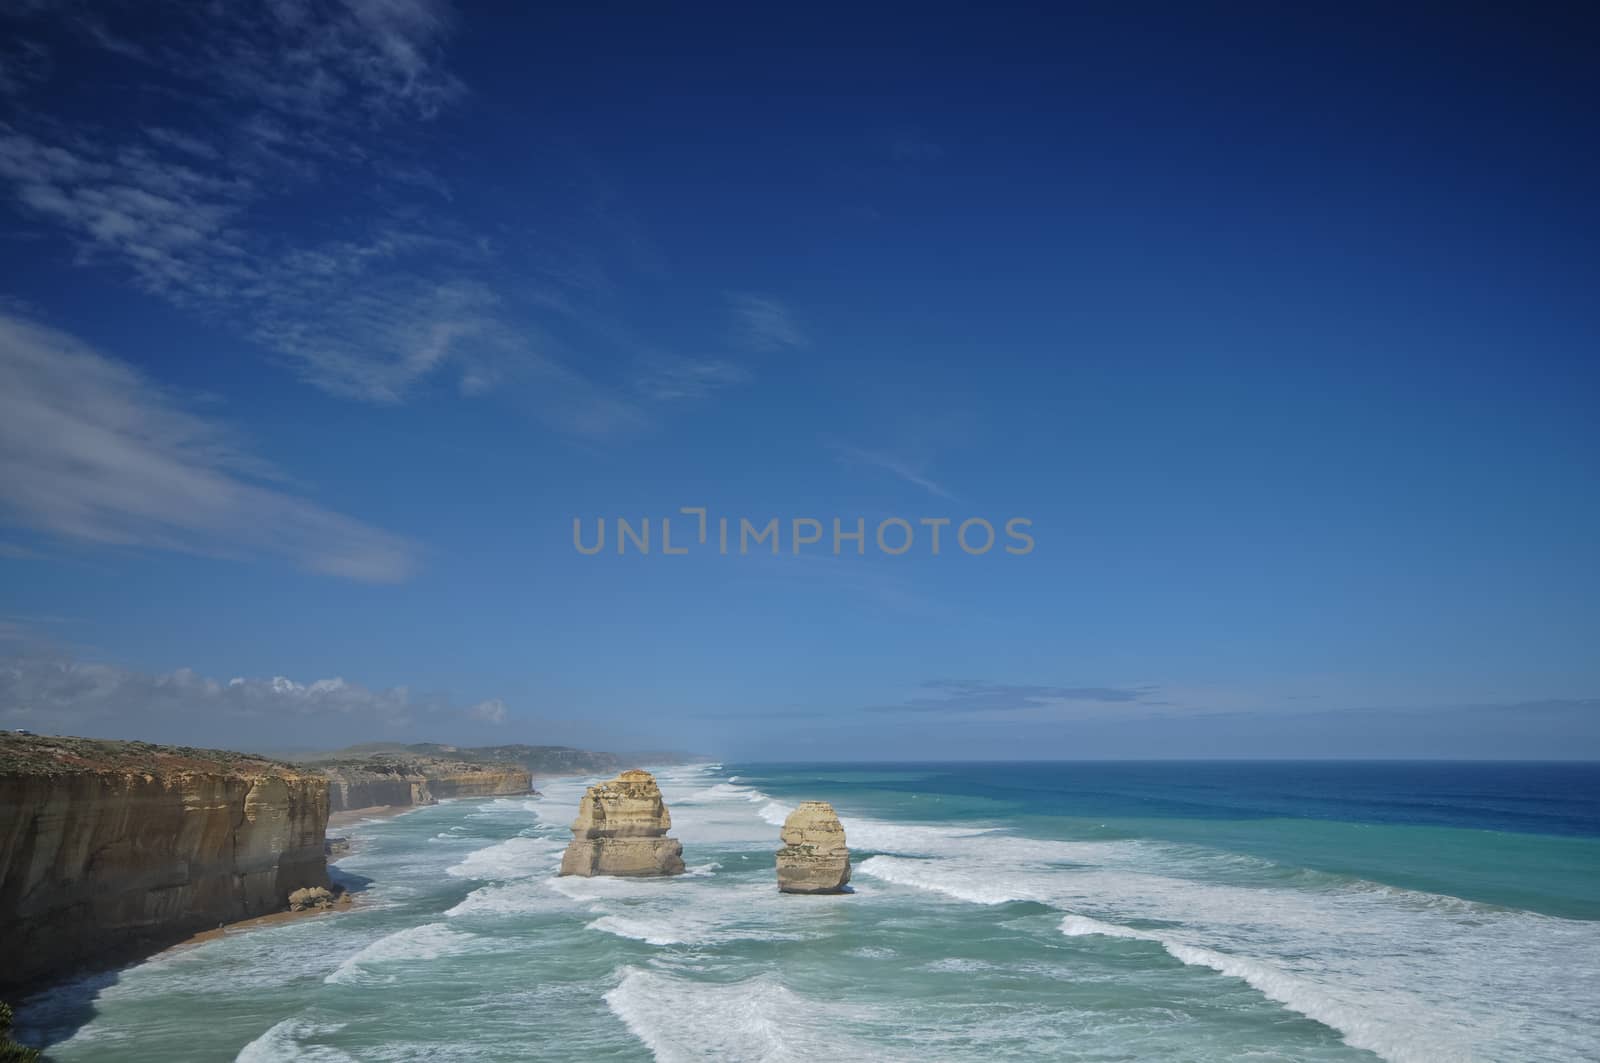 Sunny afternoon and the twelve apostles rocks near the Great Oce by eyeofpaul